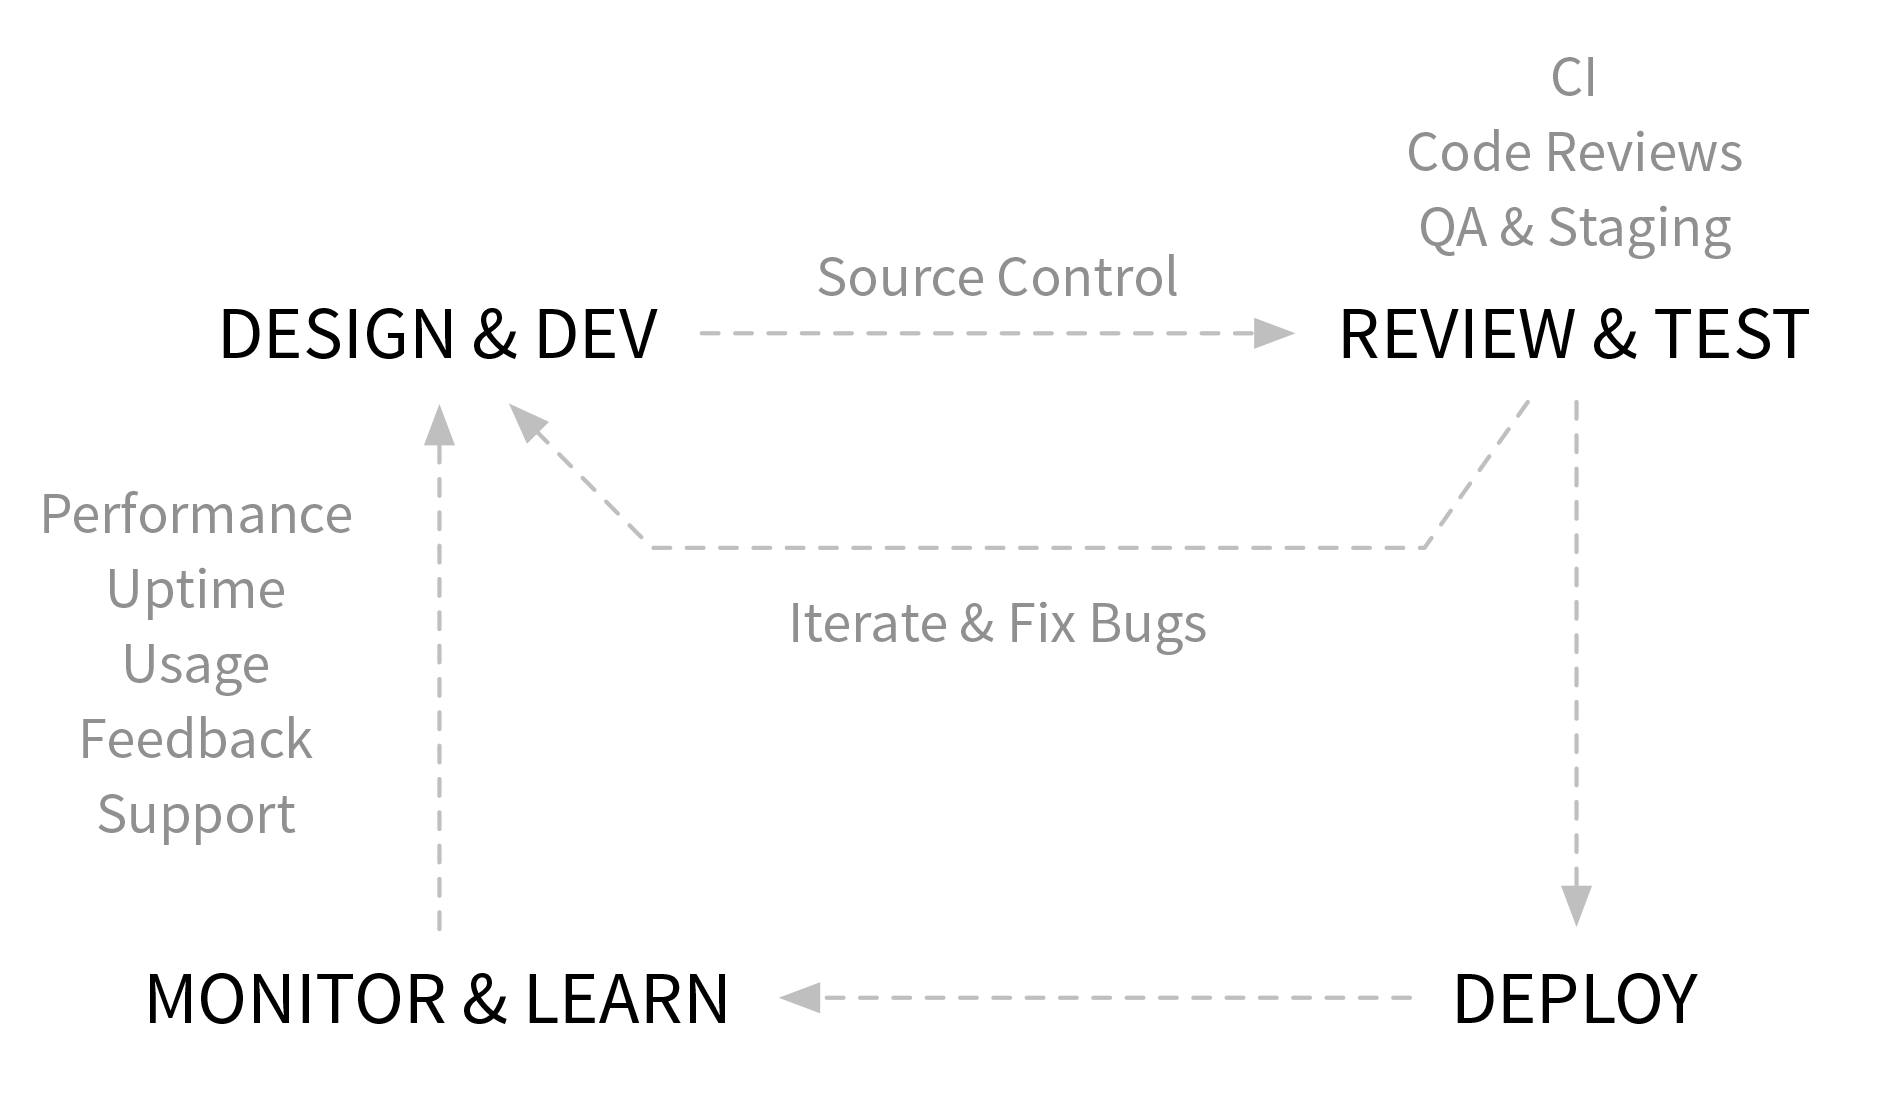 A diagram showing the circular and iterative nature of desig, develop, test, deploy, and monitor.